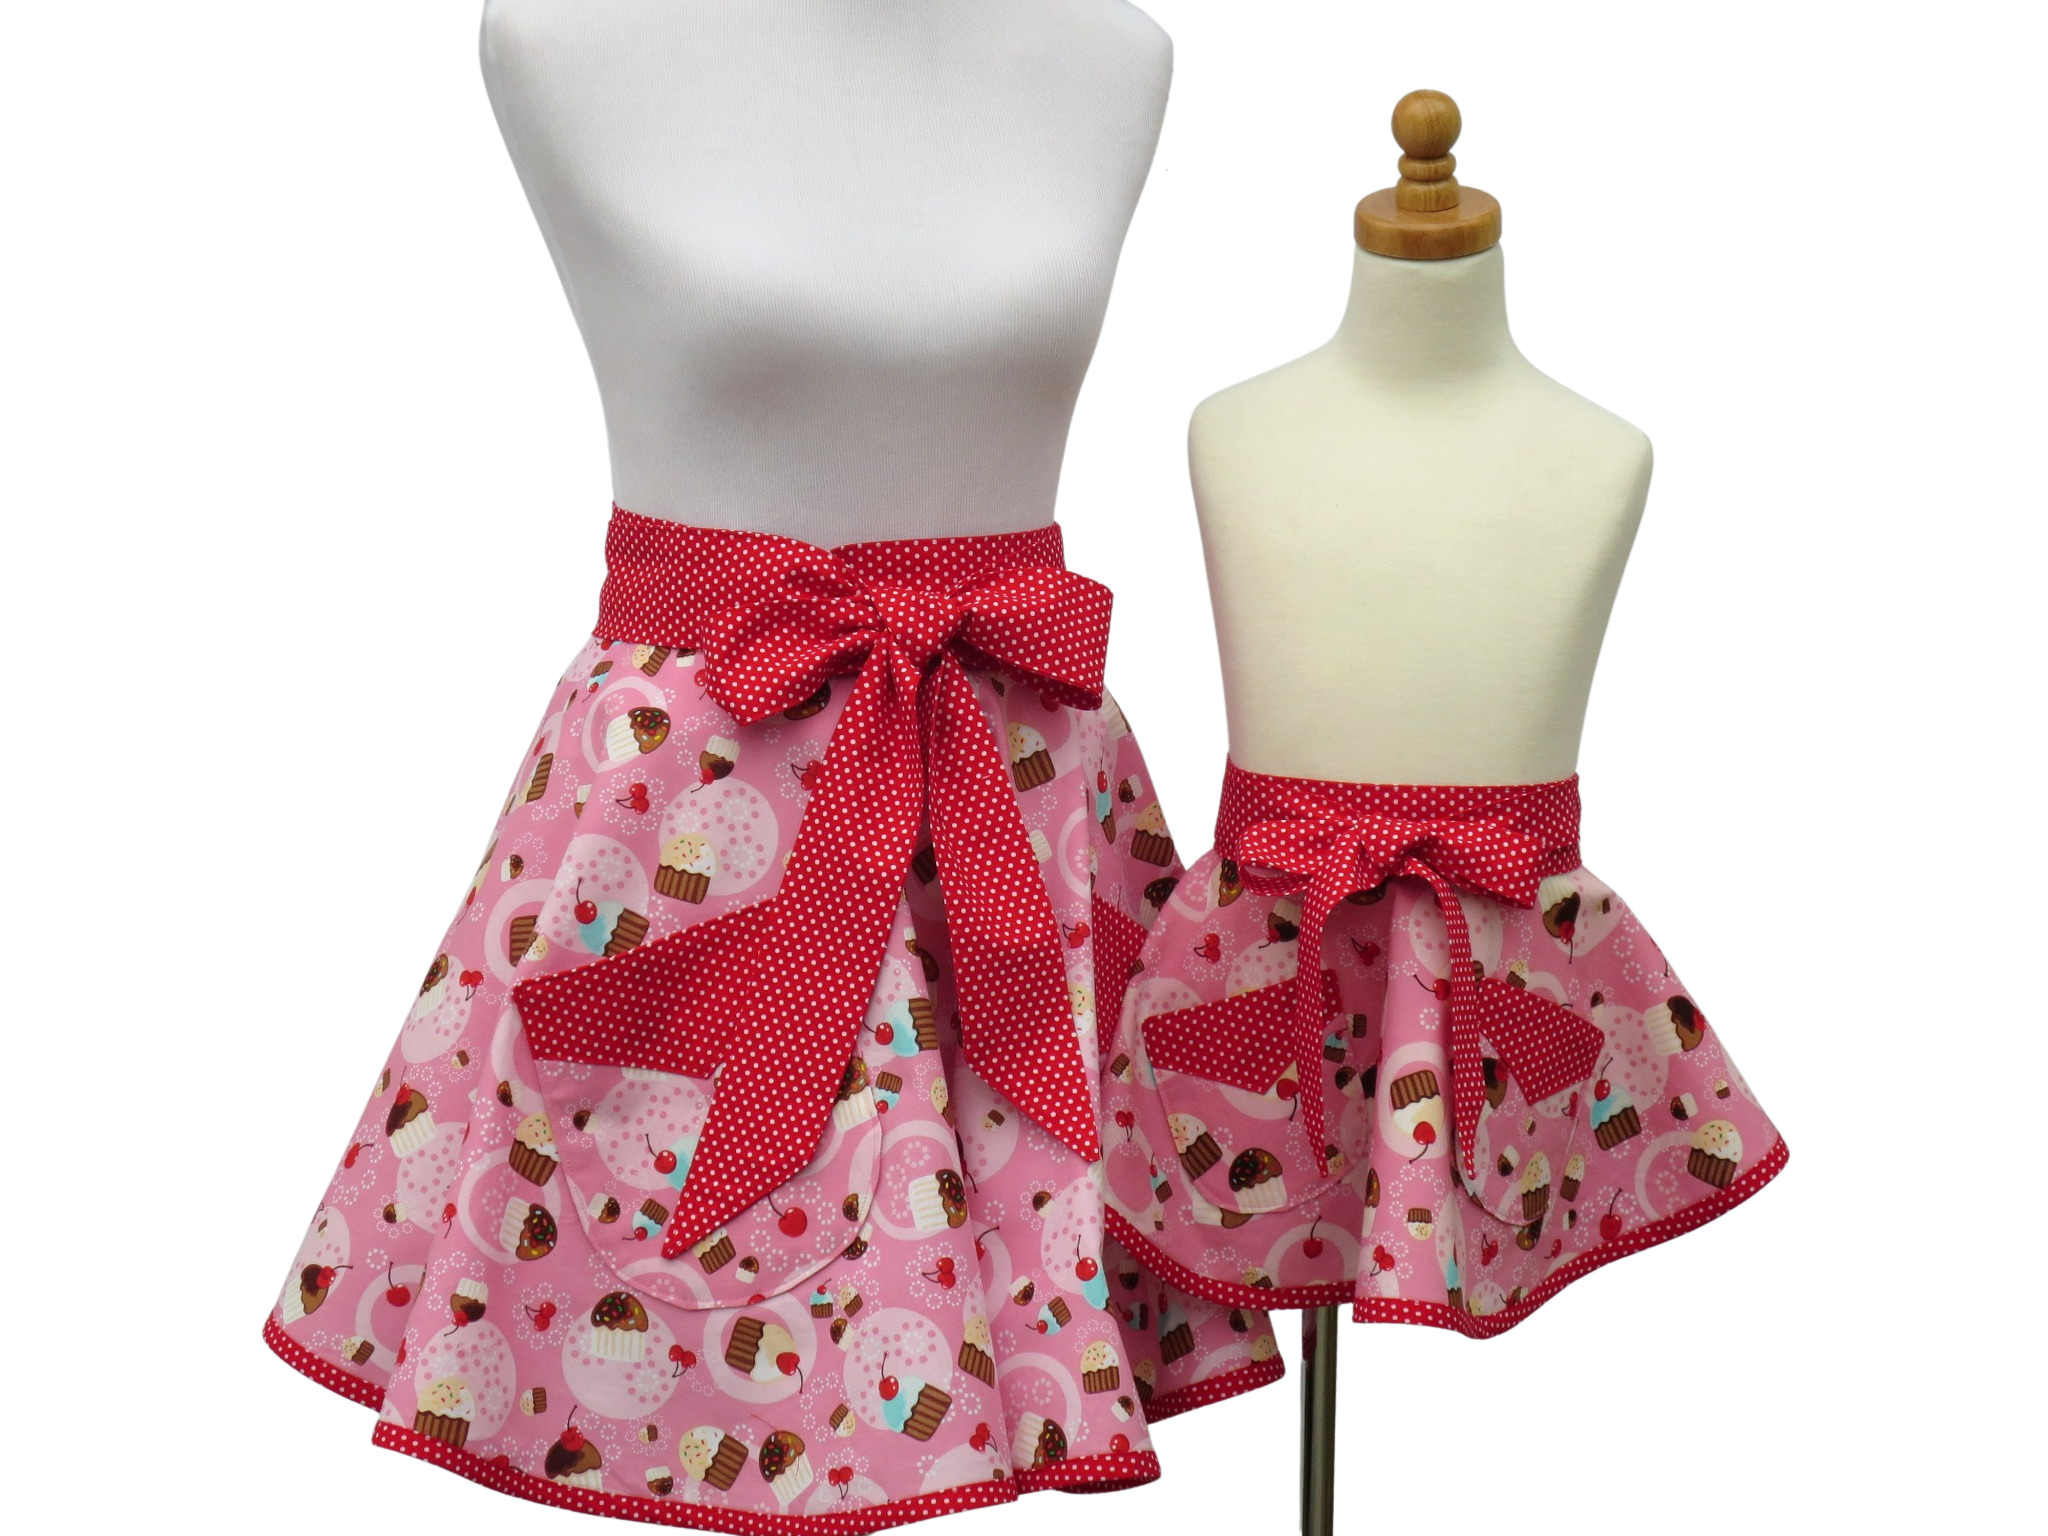 https://www.stitchedbybeverly.com/sites/stitchedbybeverly.indiemade.com/files/mother_daughter_pink_half_cupcake_apron_set_front_view_tied_in_front.jpg